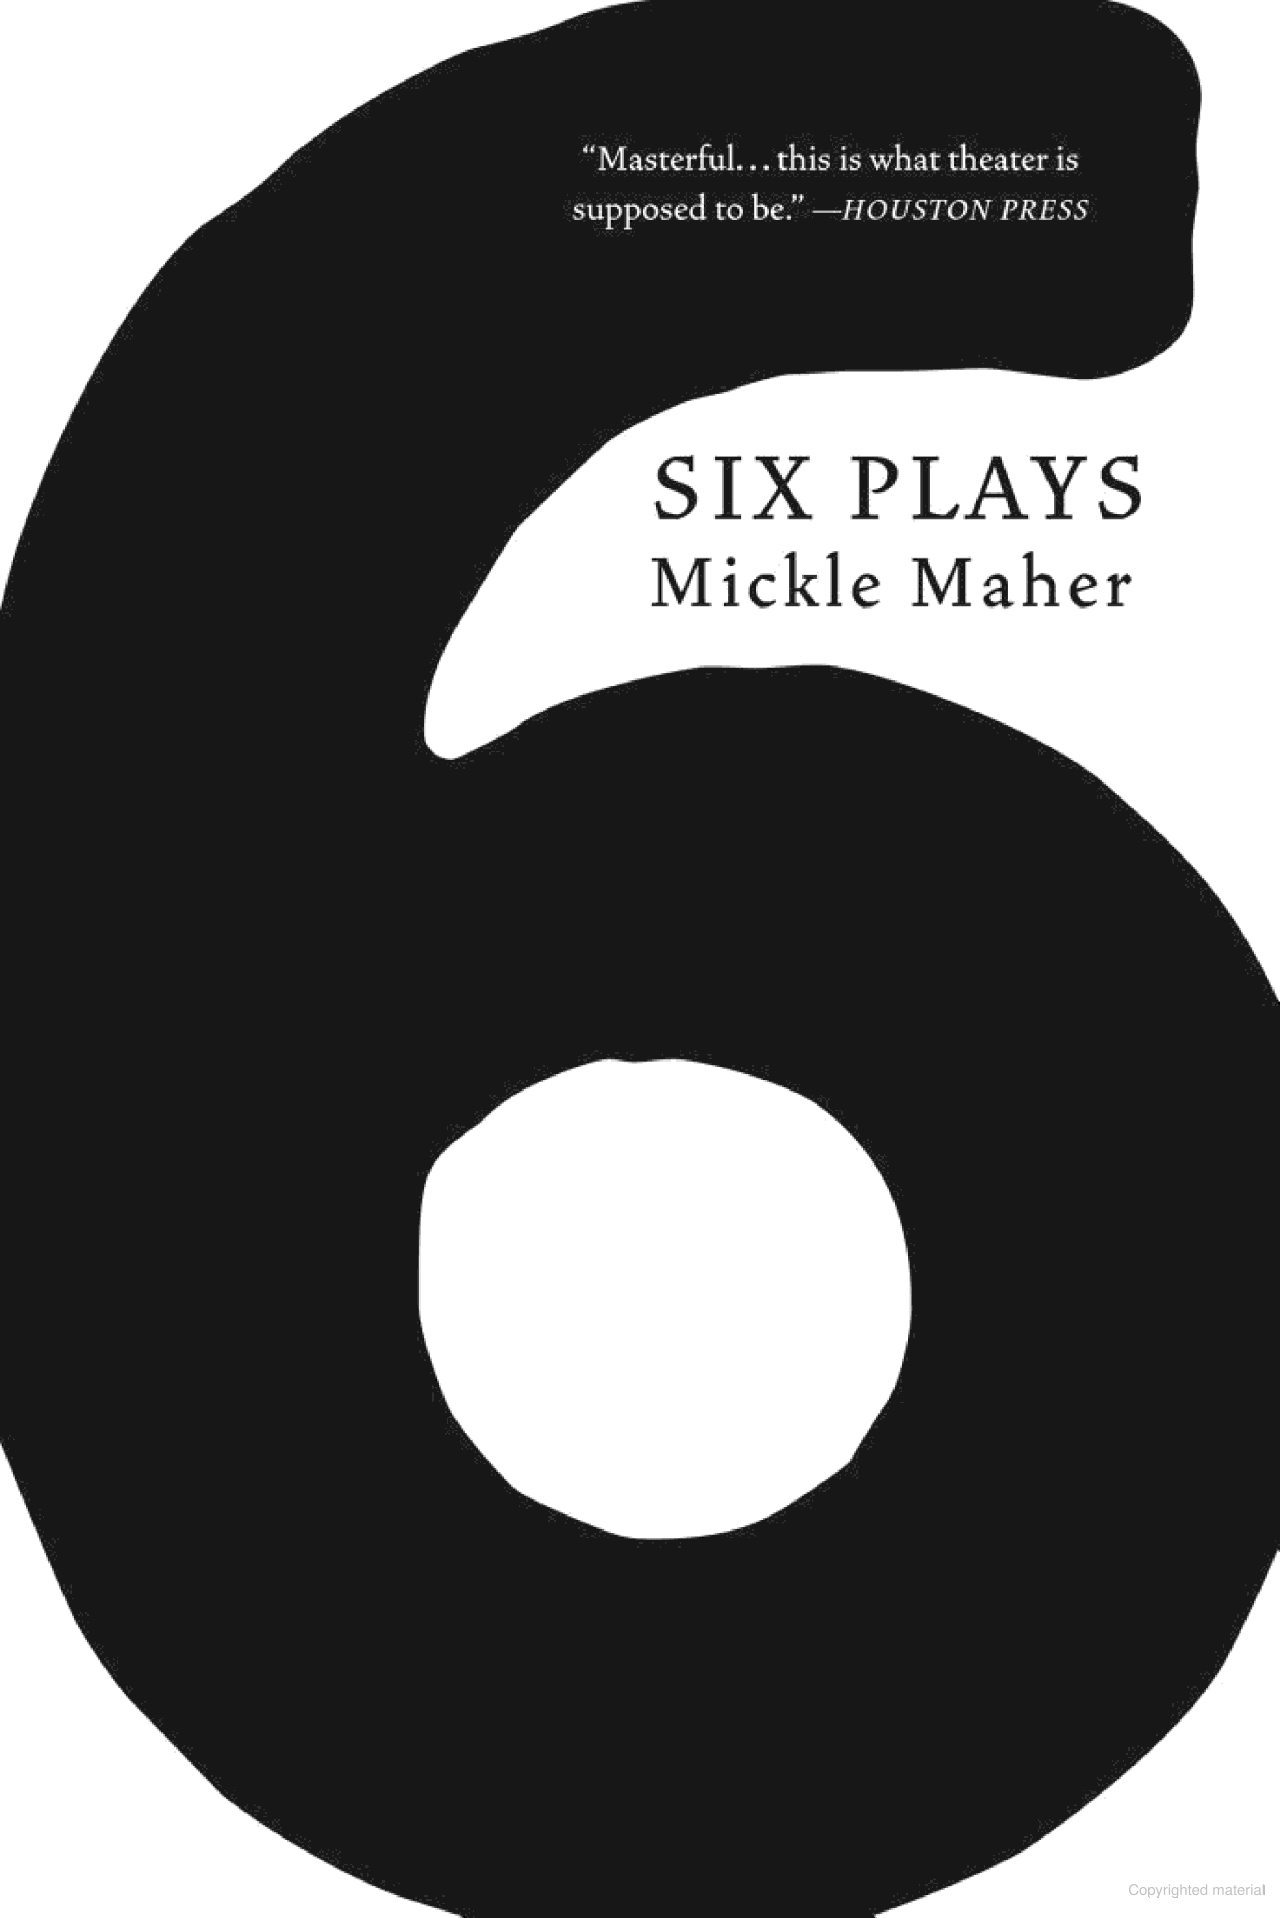 Mickle's plays